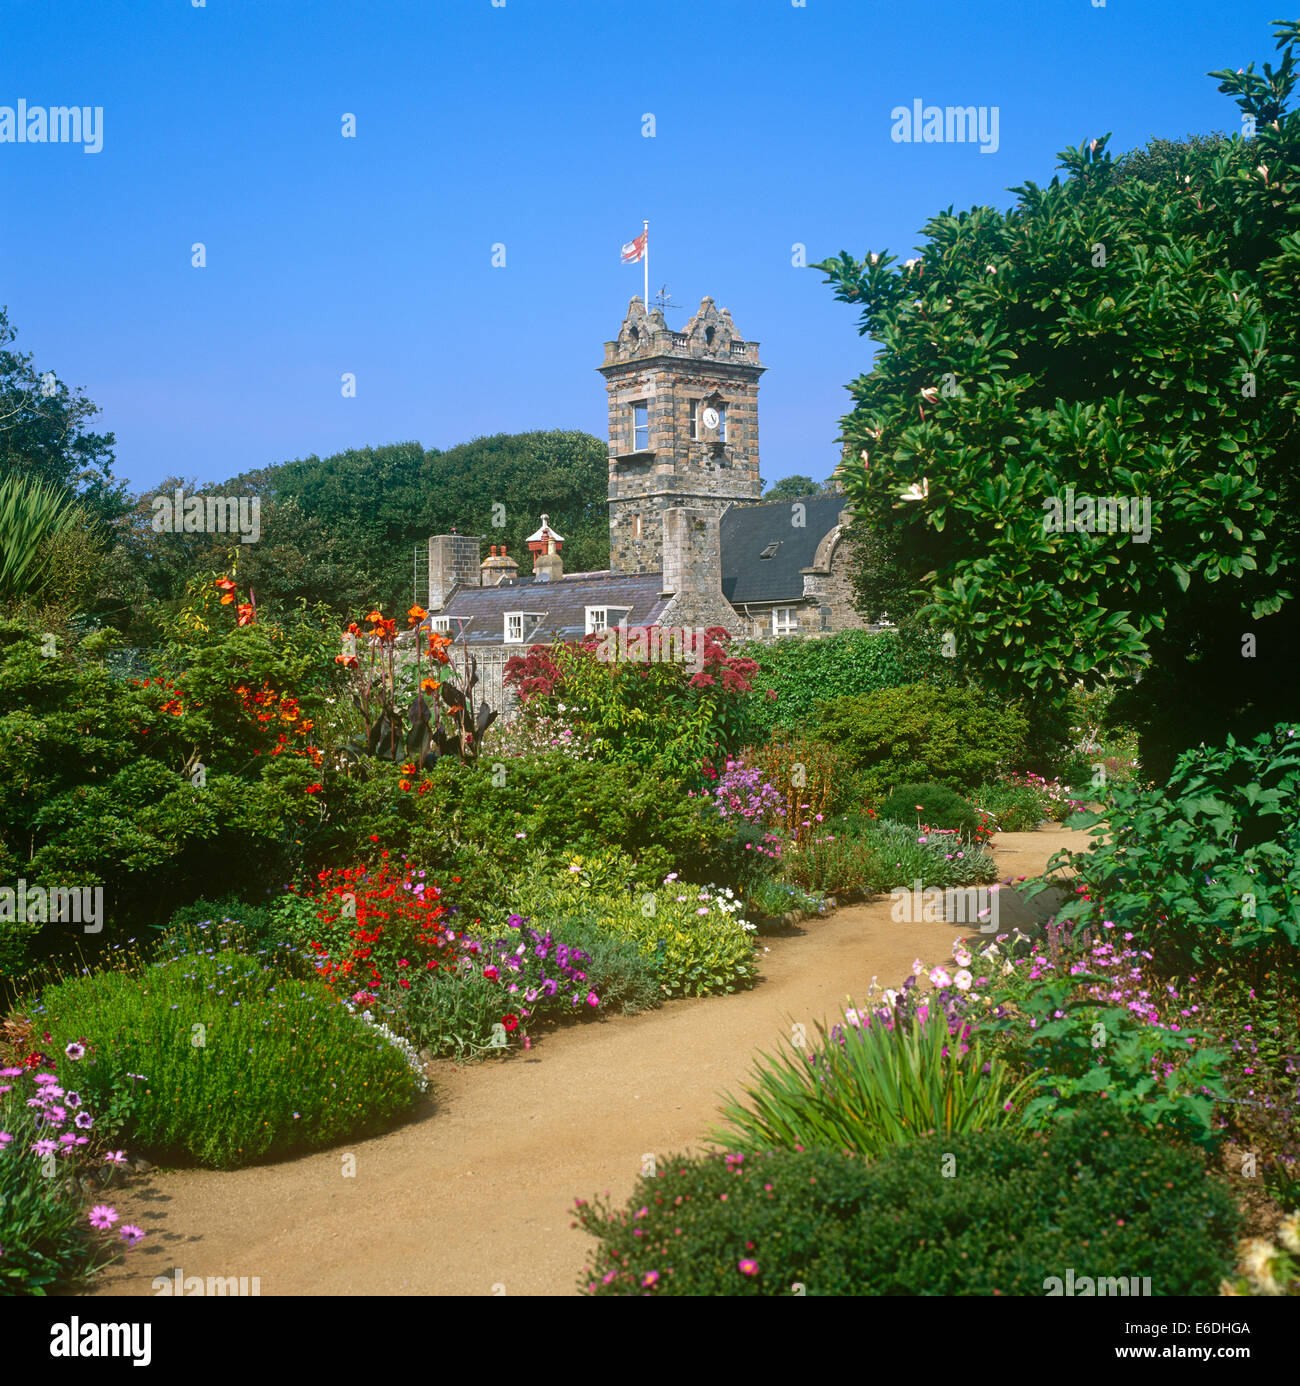 La Seigneurie Gardens with colourful flowers Stock Photo